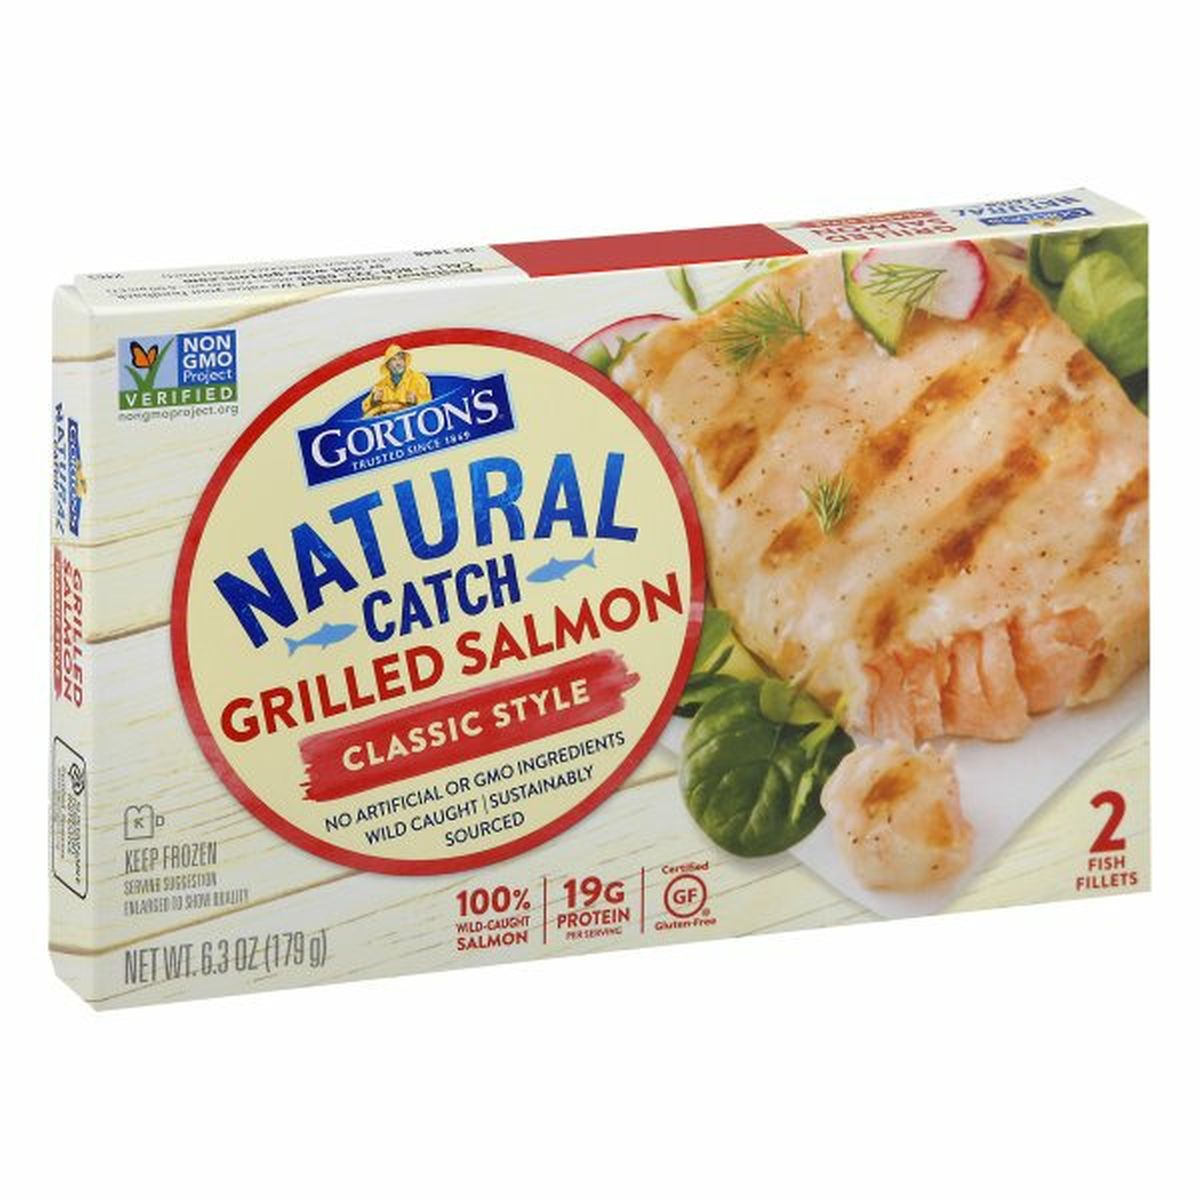 Calories in Gorton's Salmon, Grilled, Classic Style